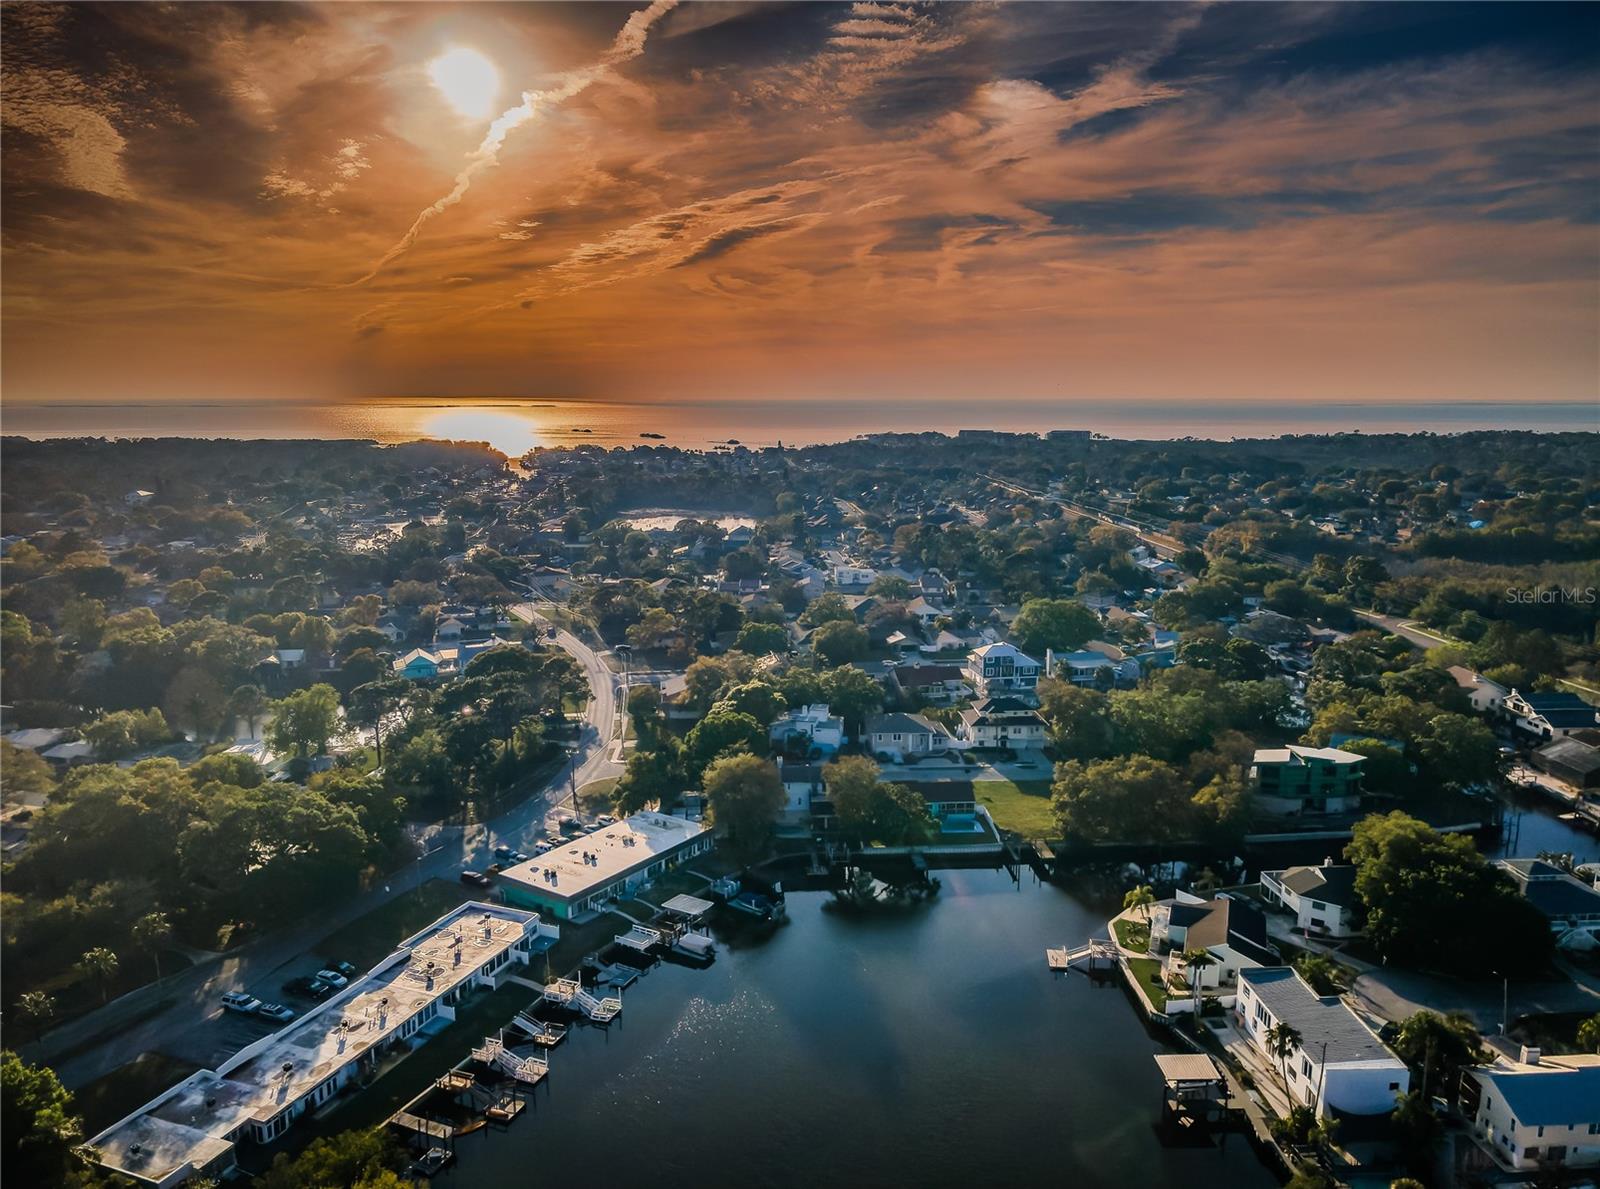 Cove Springs Waterfront Community